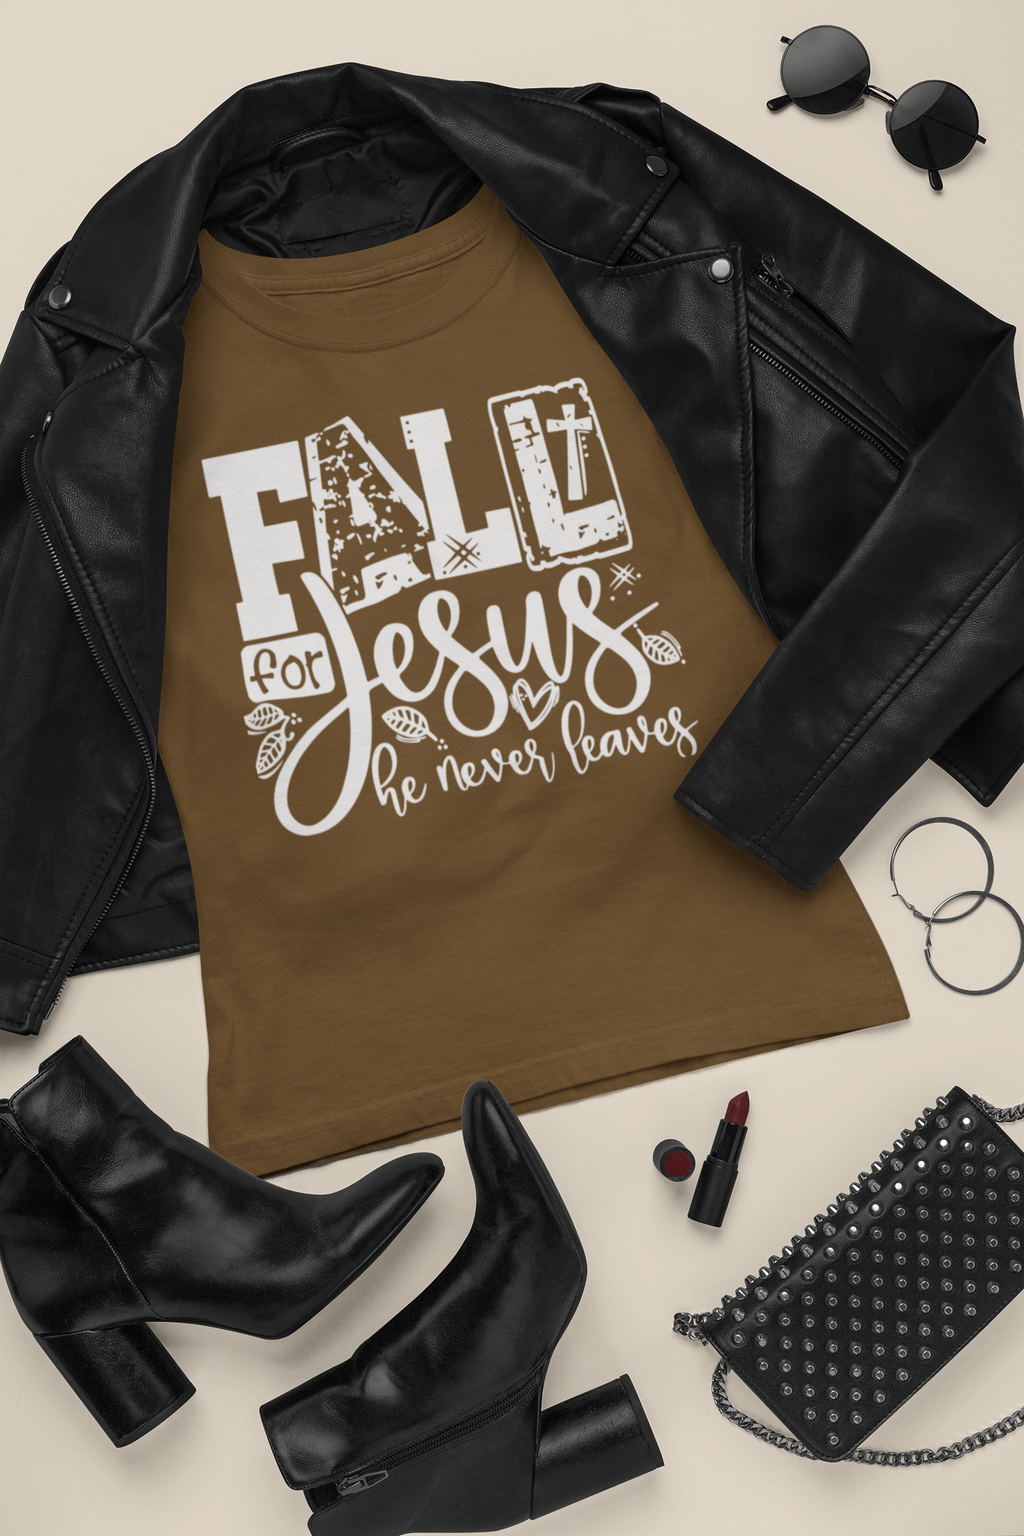 outfit-mockup-featuring-a-t-shirt-surrounded-by-dark-leather-girly-garments-26395 (1)